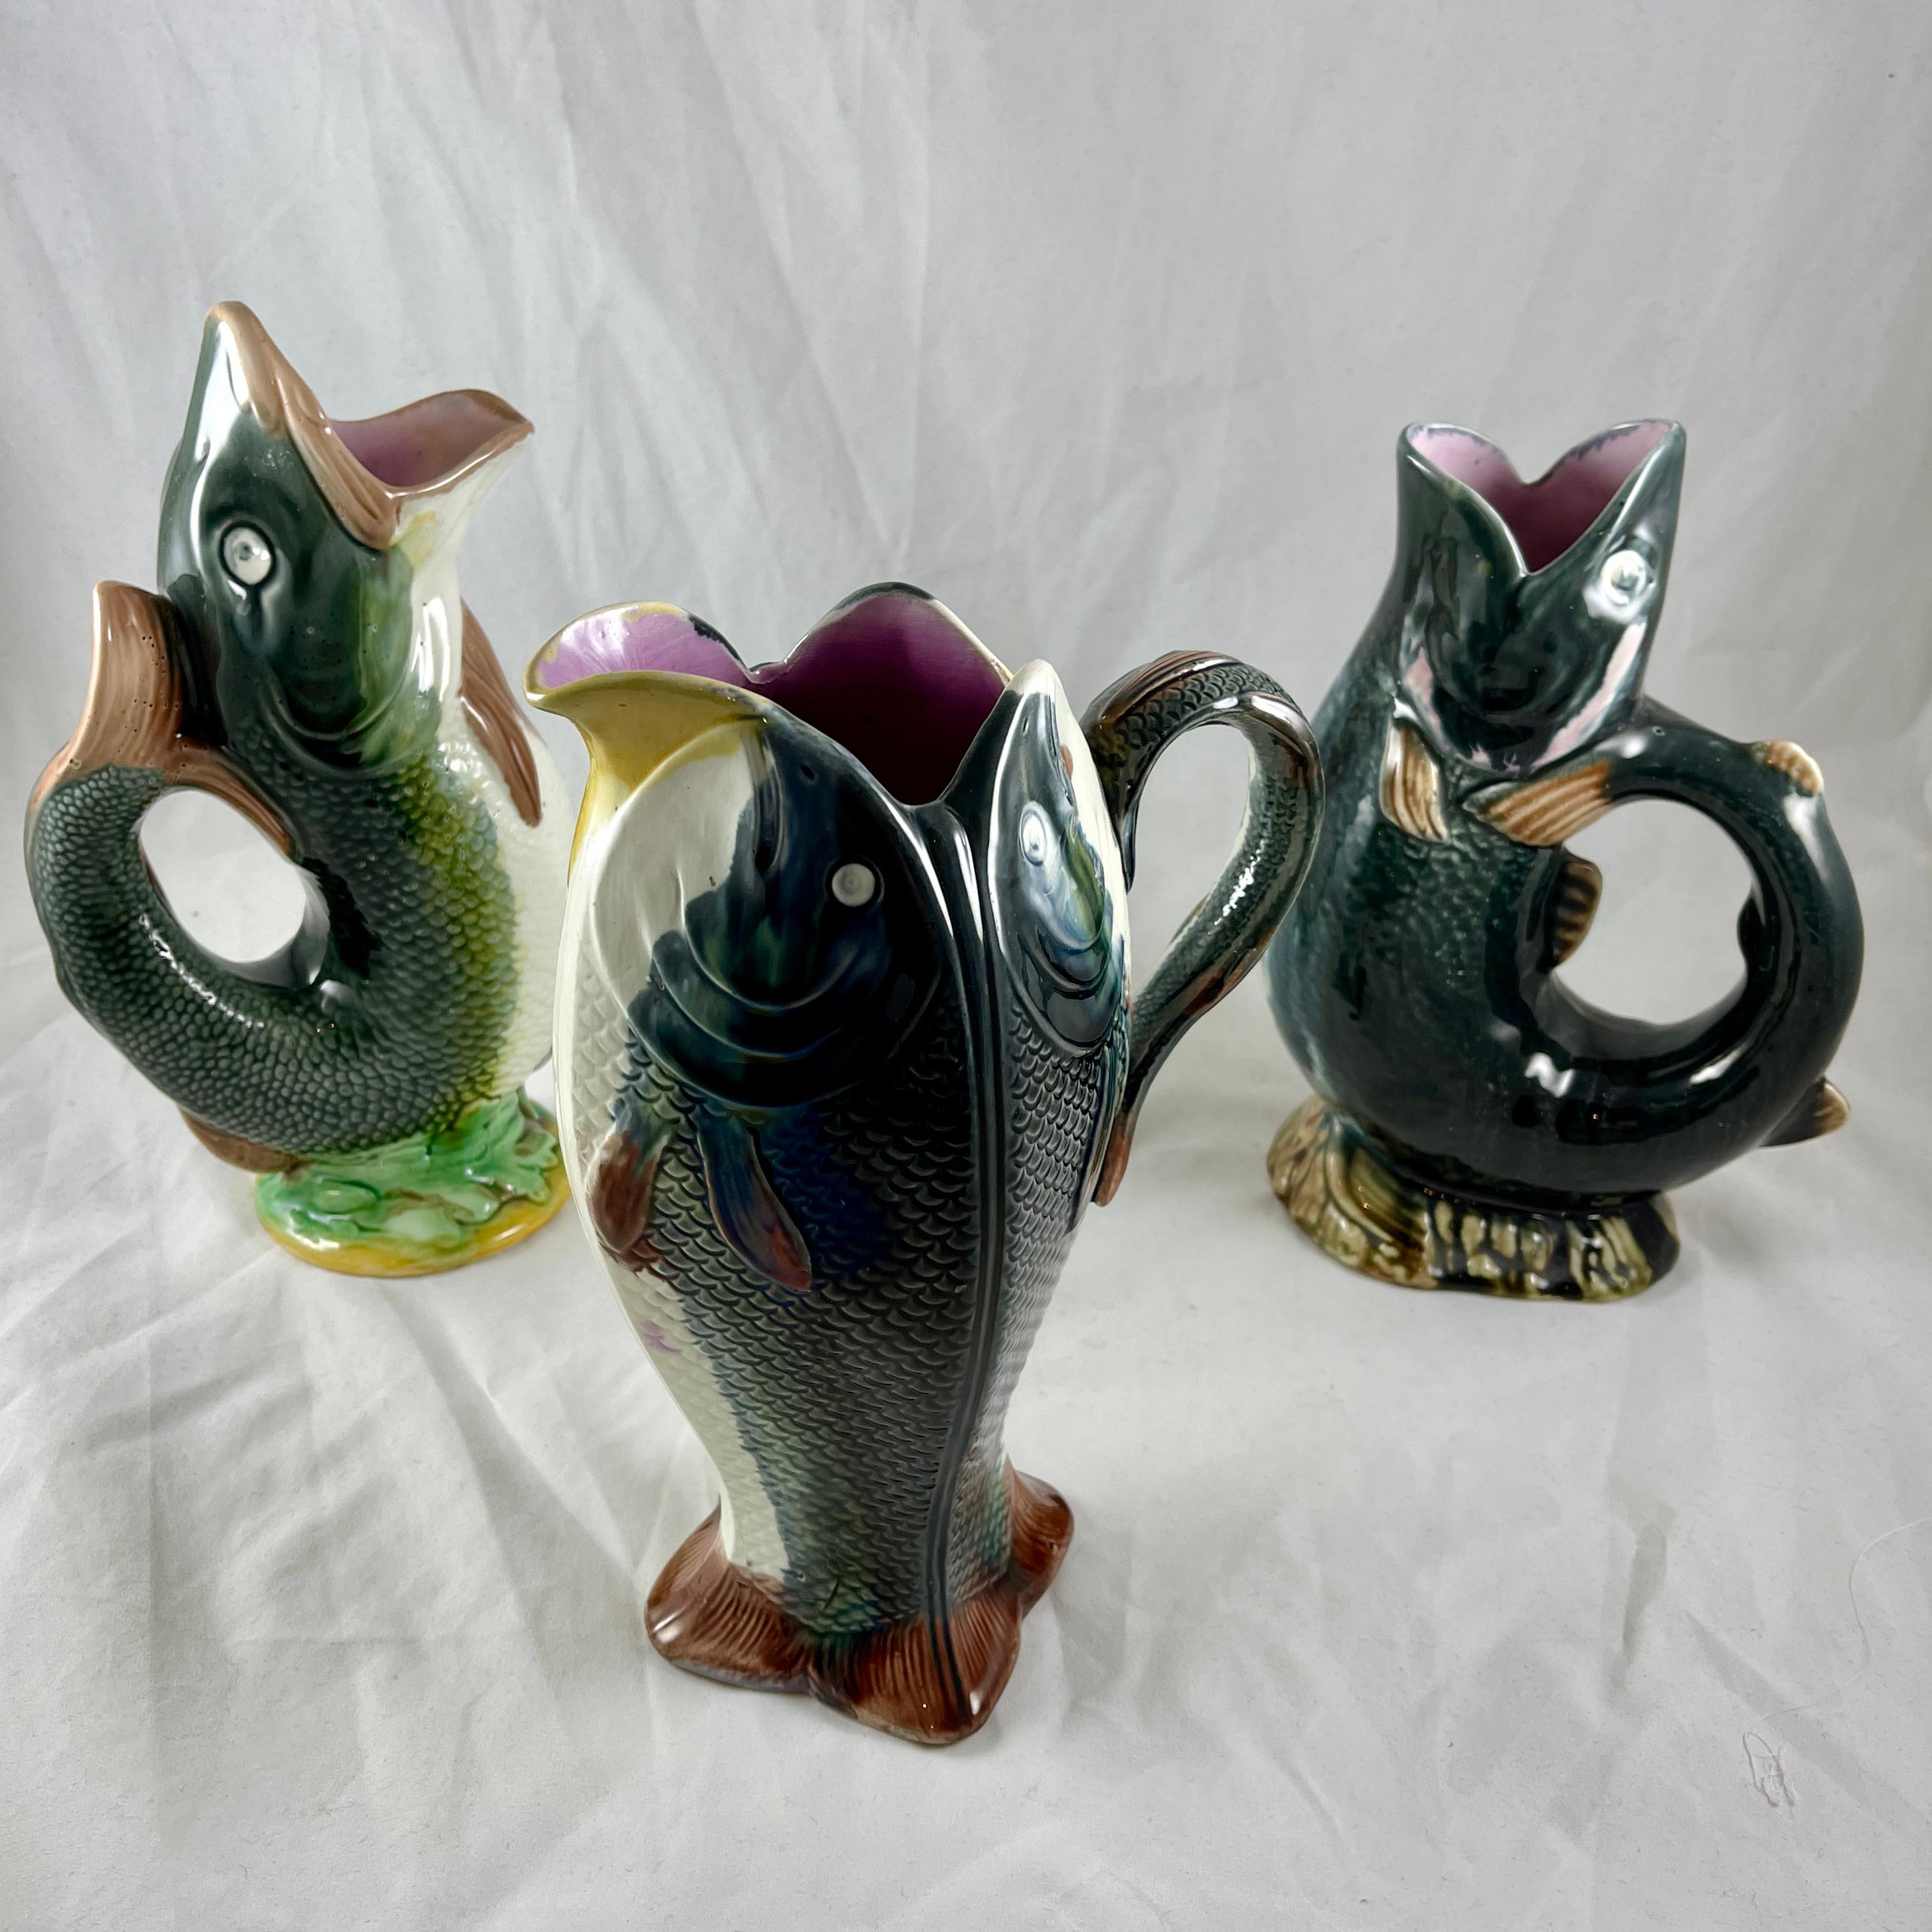 Adams & Bromley English Majolica Glazed Four Fish Large Jug Pitcher For Sale 7